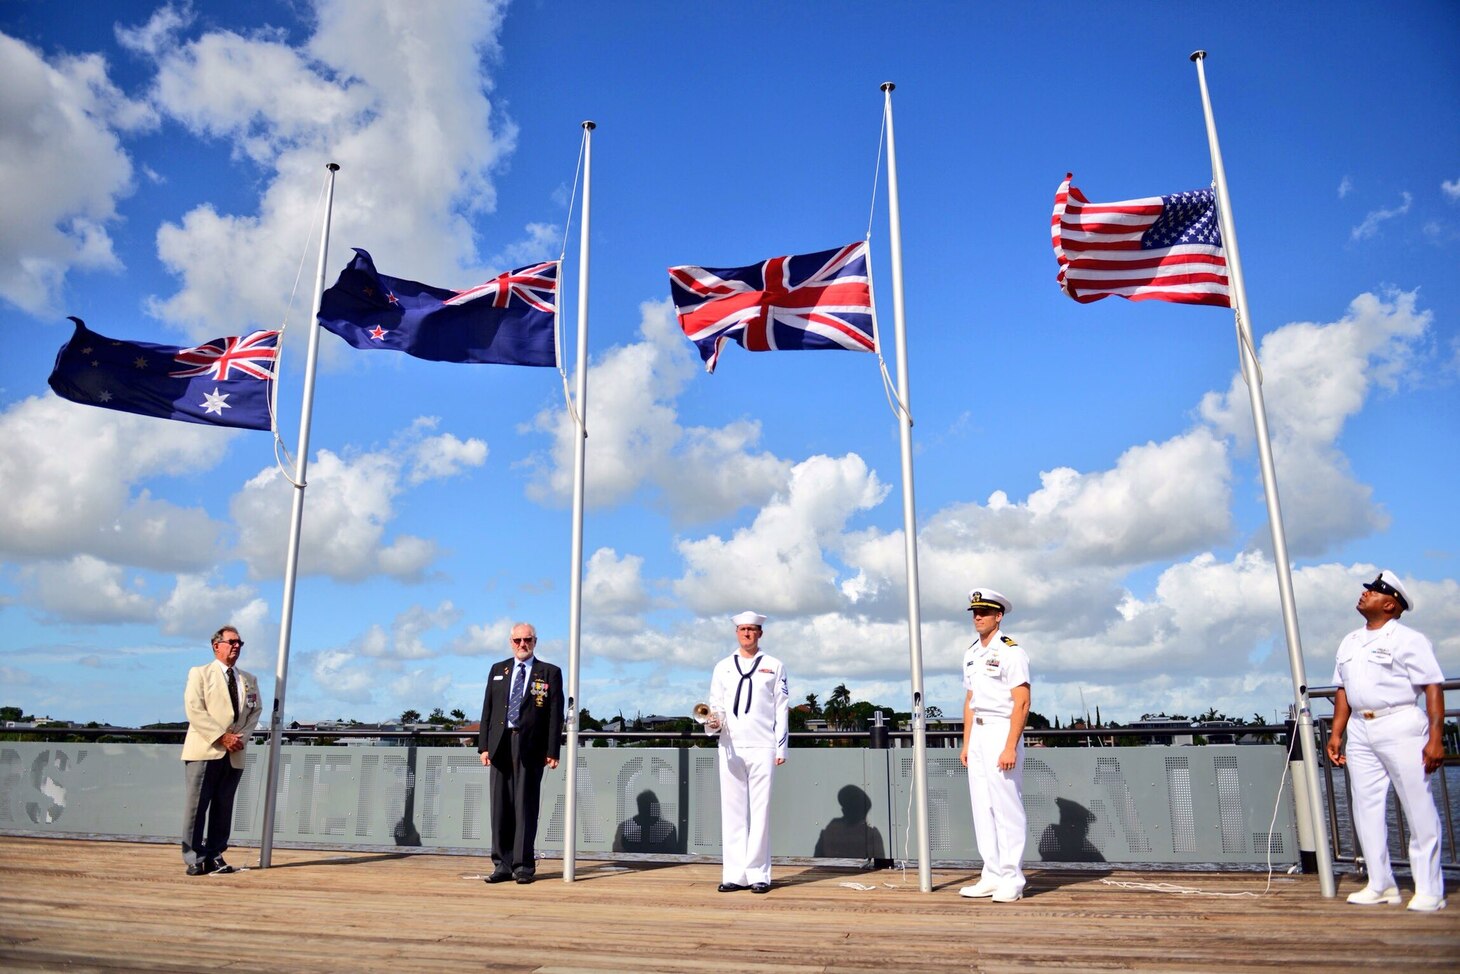 BRISBANE, Australia (March 14, 2018) Vice Adm. Phil Sawyer, commander of U.S. 7th Fleet participates in a wreath laying ceremony at the Submariners Walk Heritage Trail, where the U.S. Navy's Task Force 42/72 was located during World War II. Sawyer is visiting Brisbane in conjunction with the 75th anniversary of 7th Fleet's establishment here on March 15, 1943. (U.S Consulate General Sydney photo)